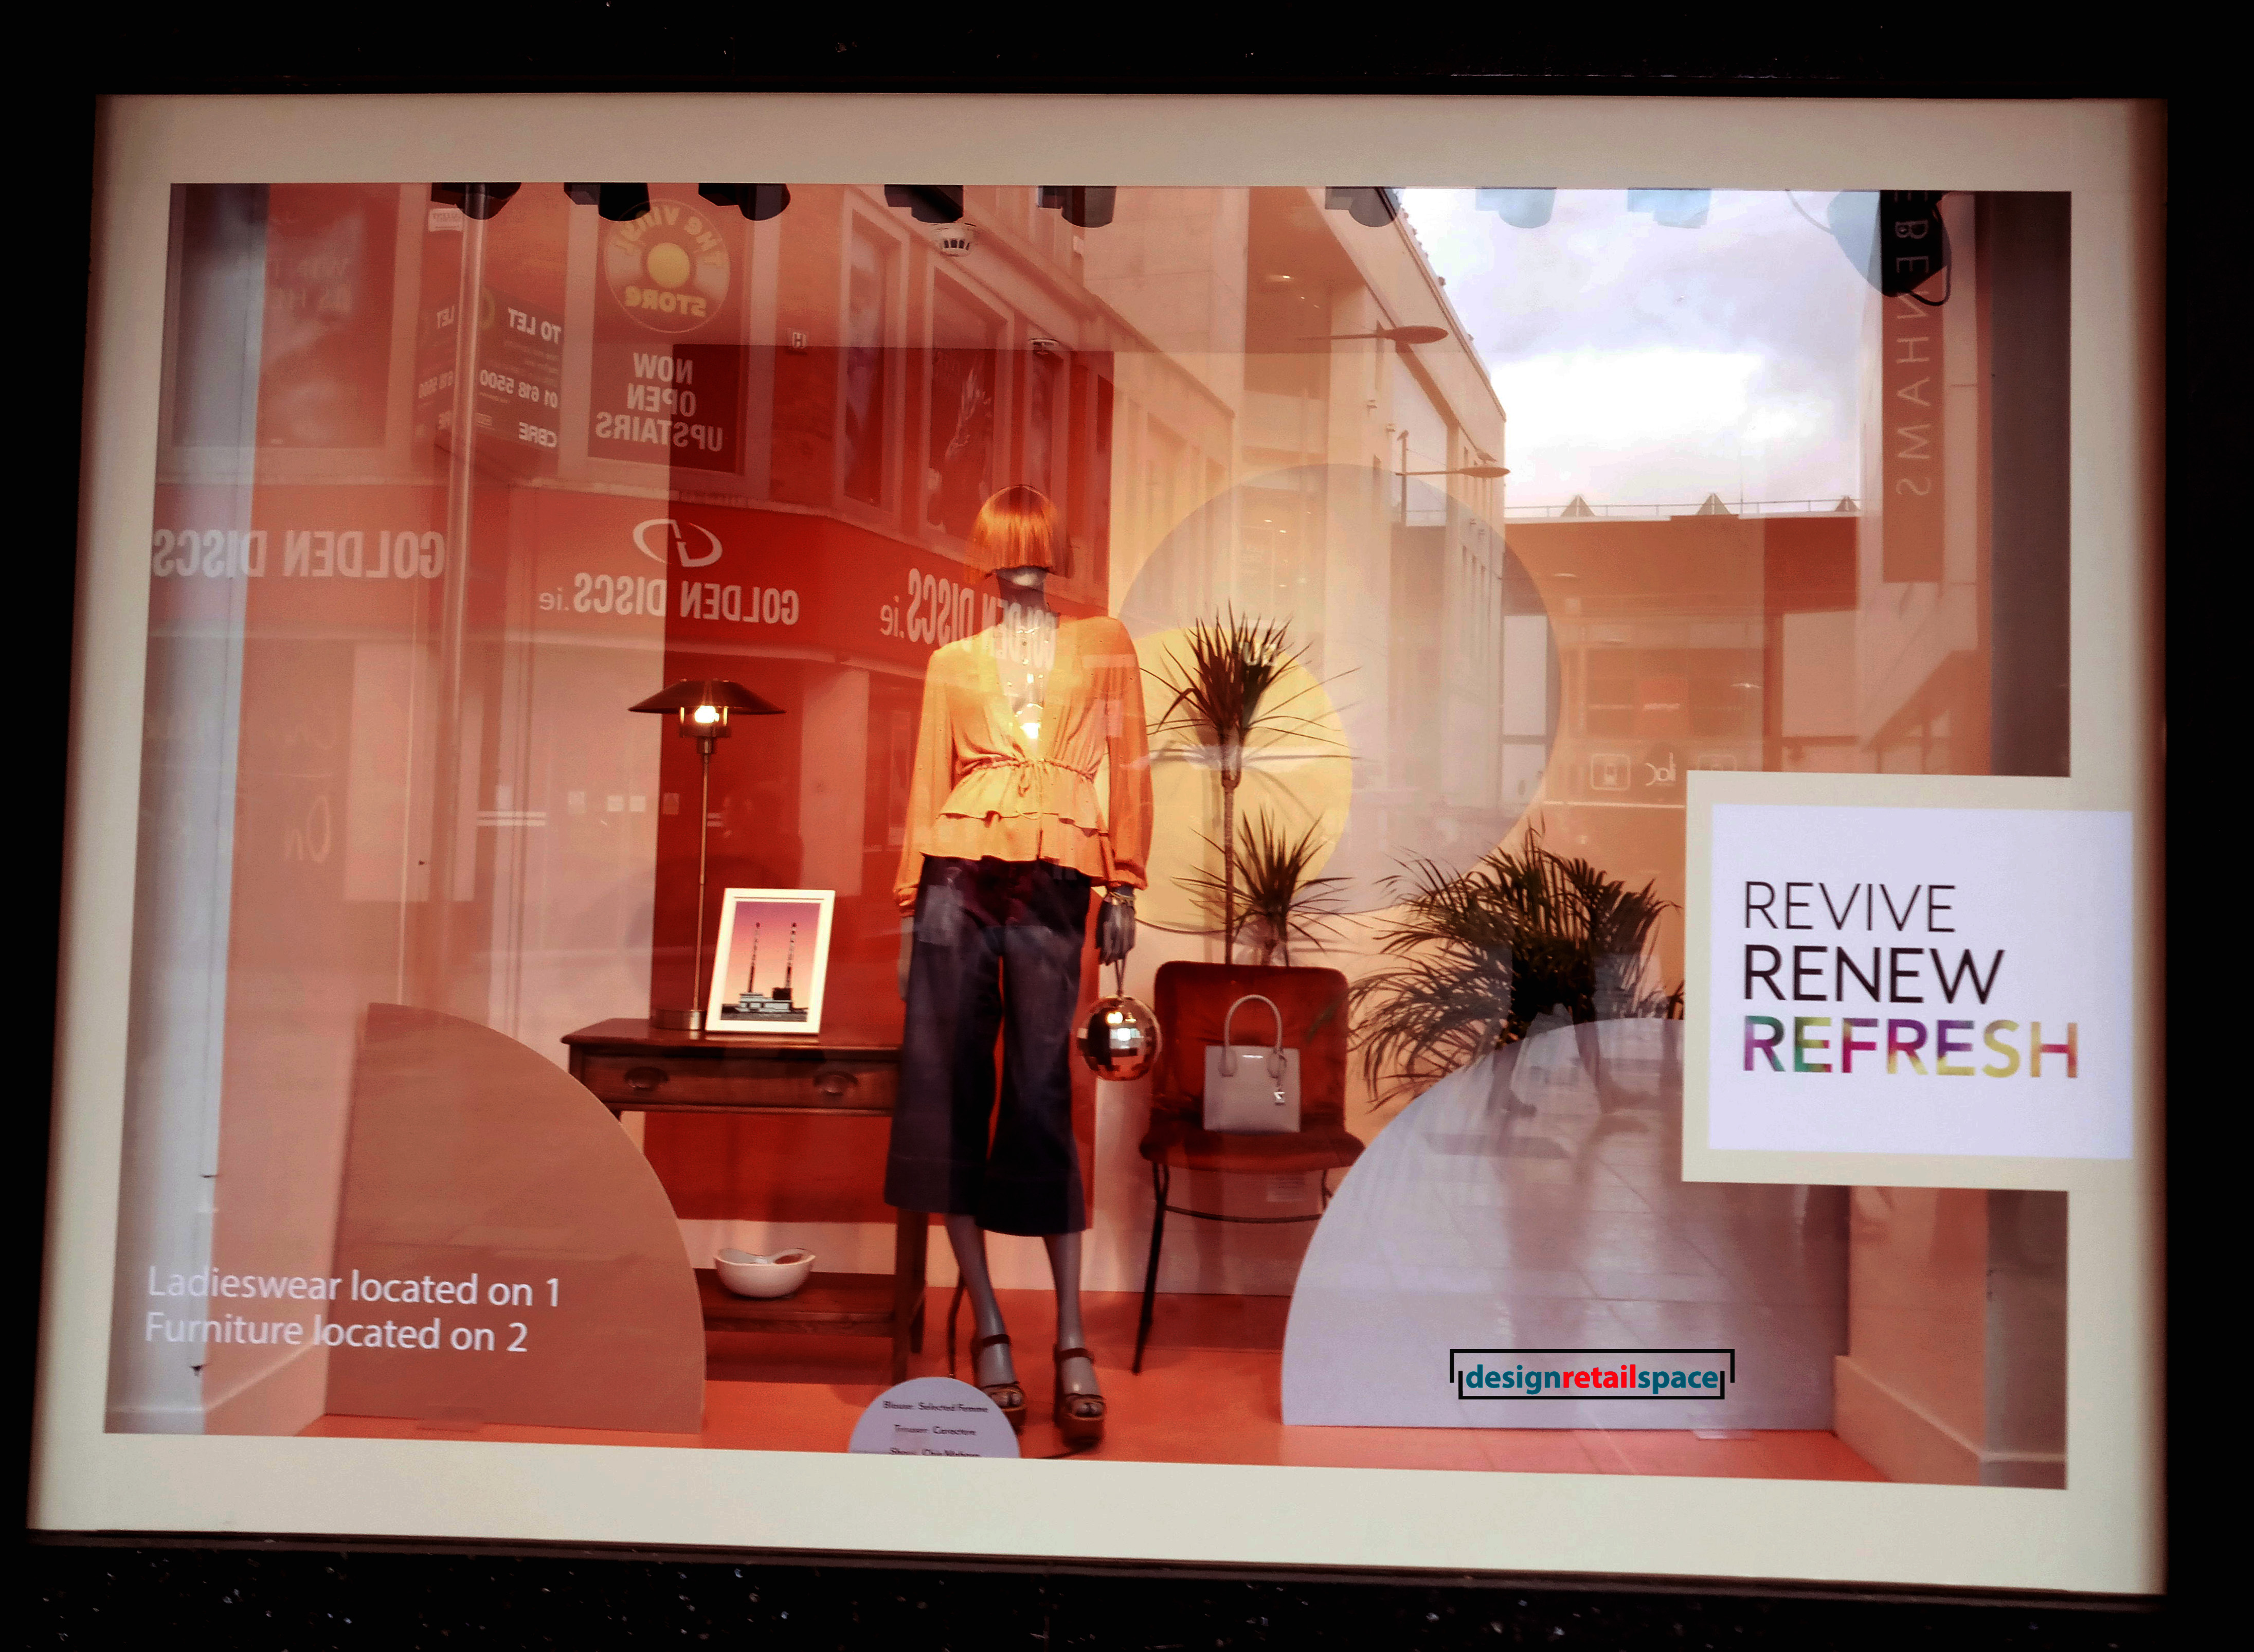 Arnotts window display showing furniture on display with Millennial pink and burgundy colour in the background as representation of colour trends 2018